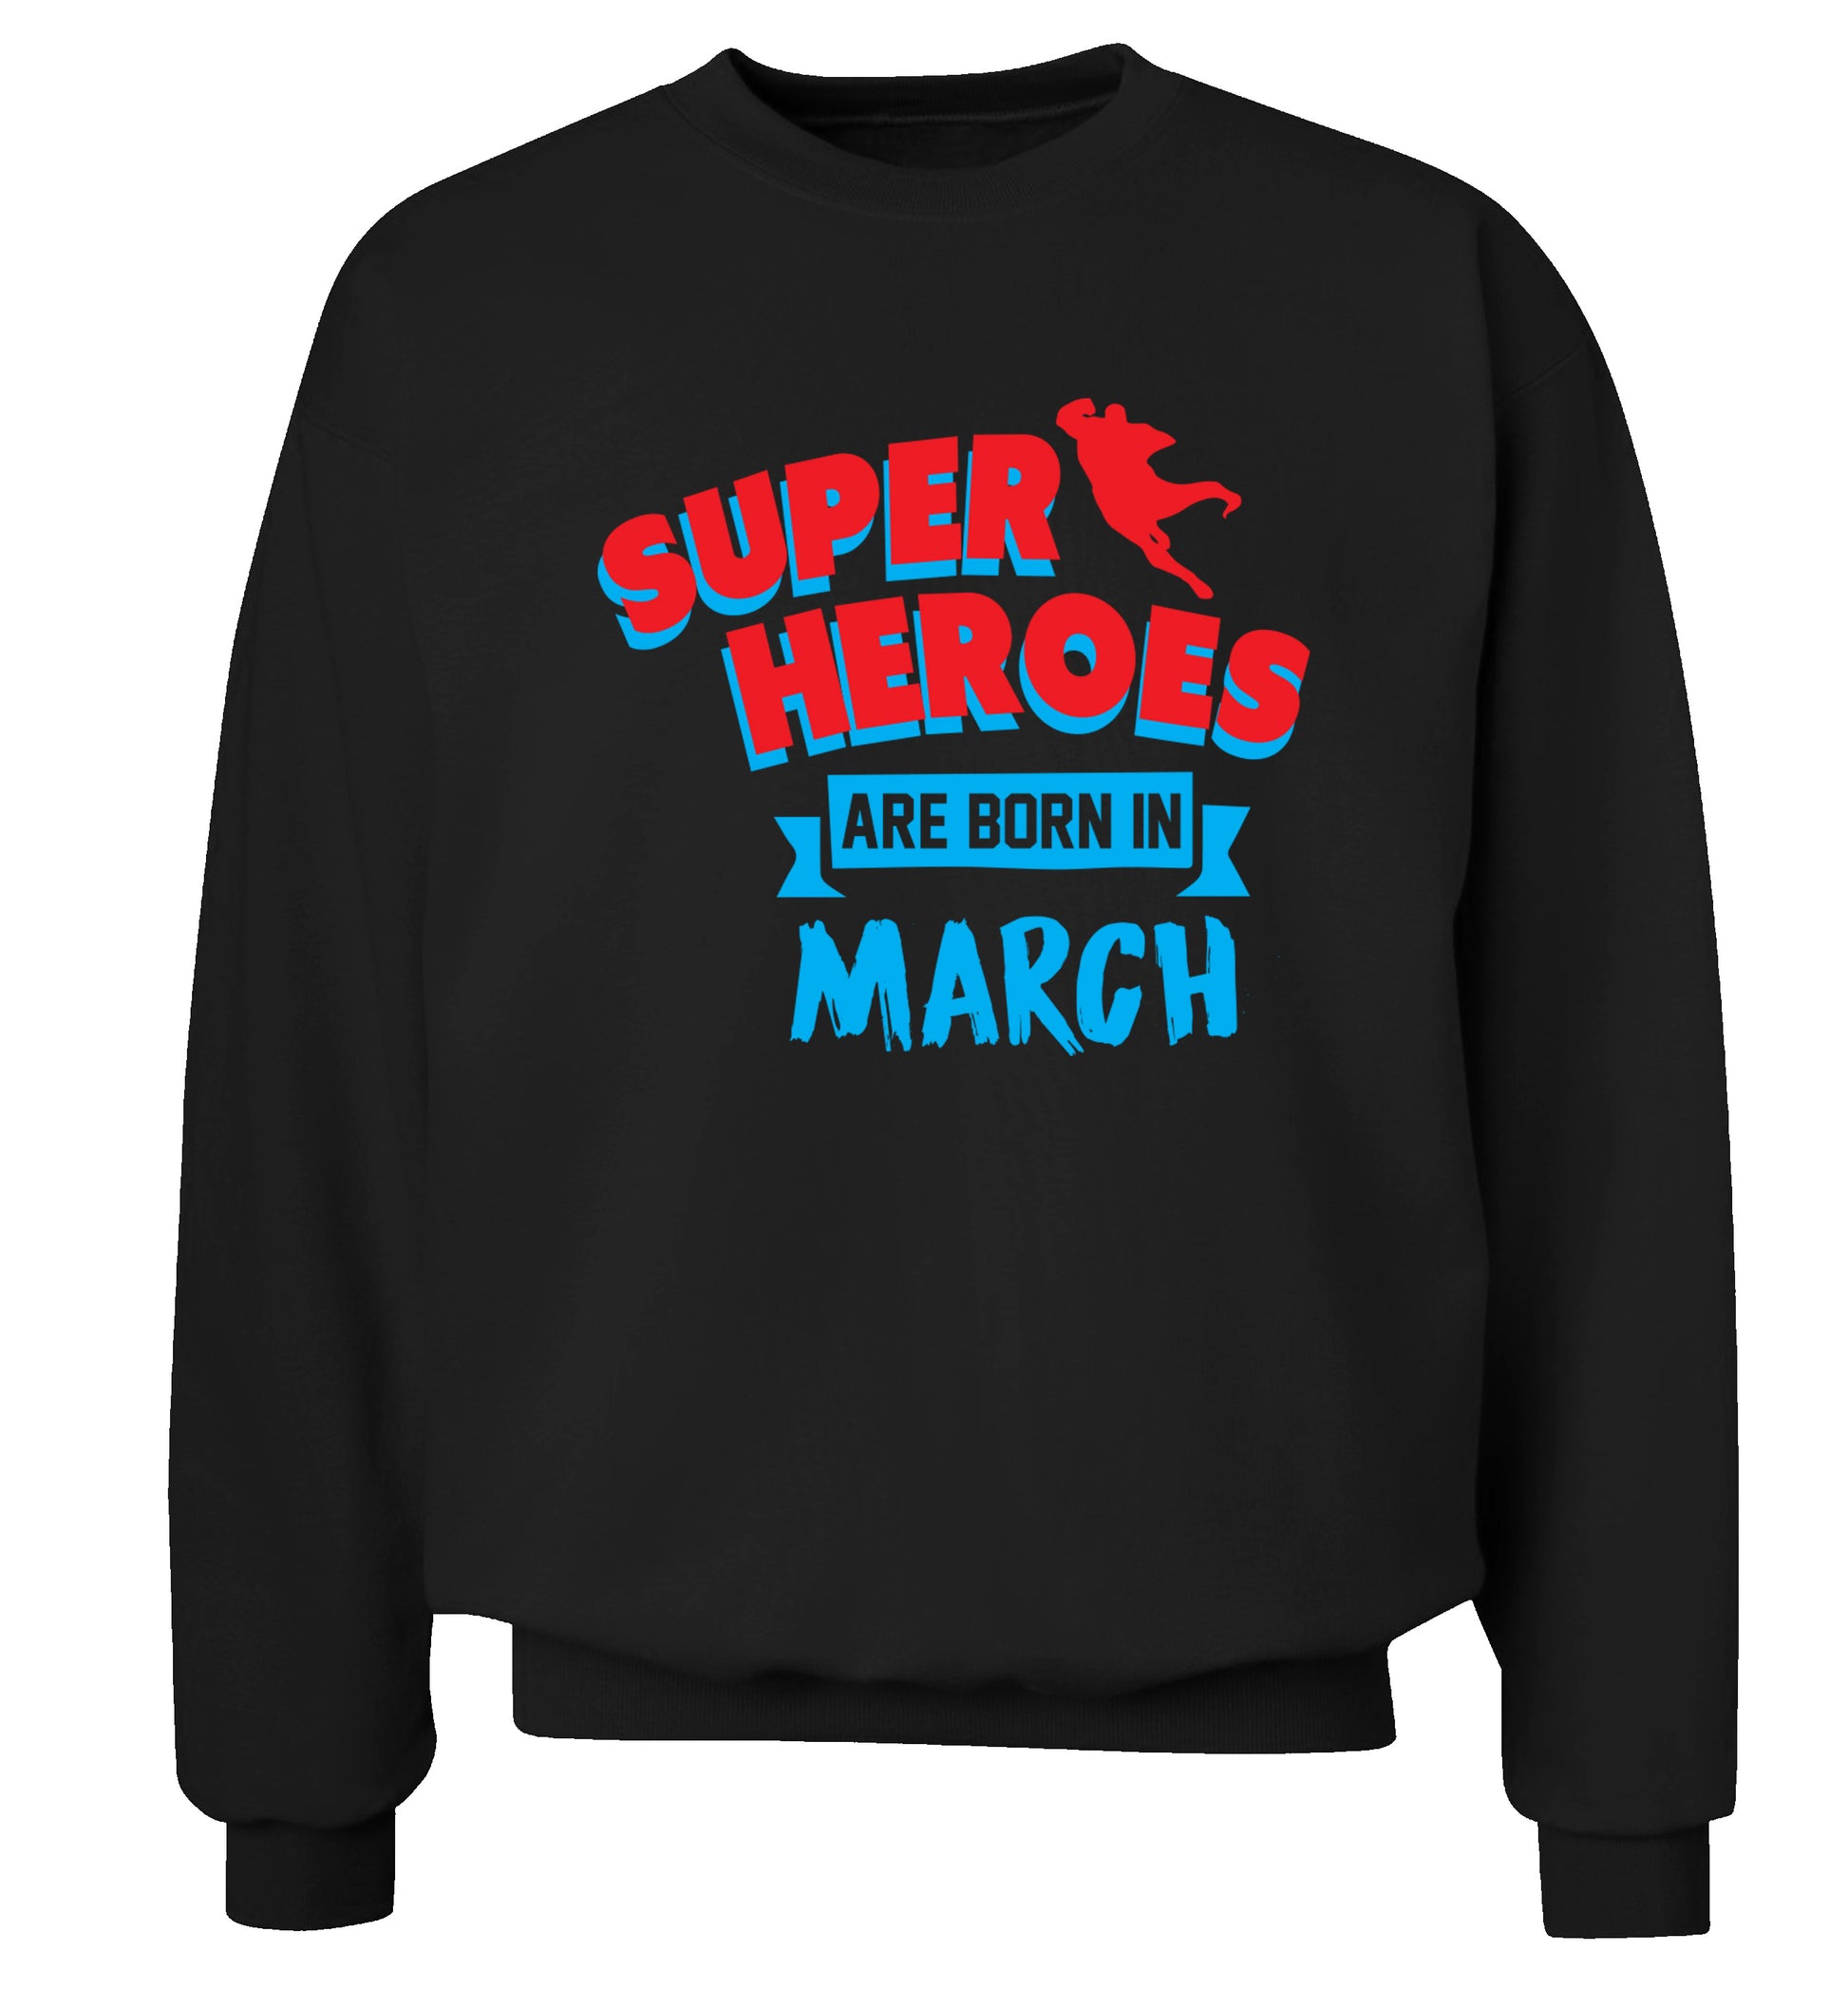 Superheros are born in March Adult's unisex black Sweater 2XL